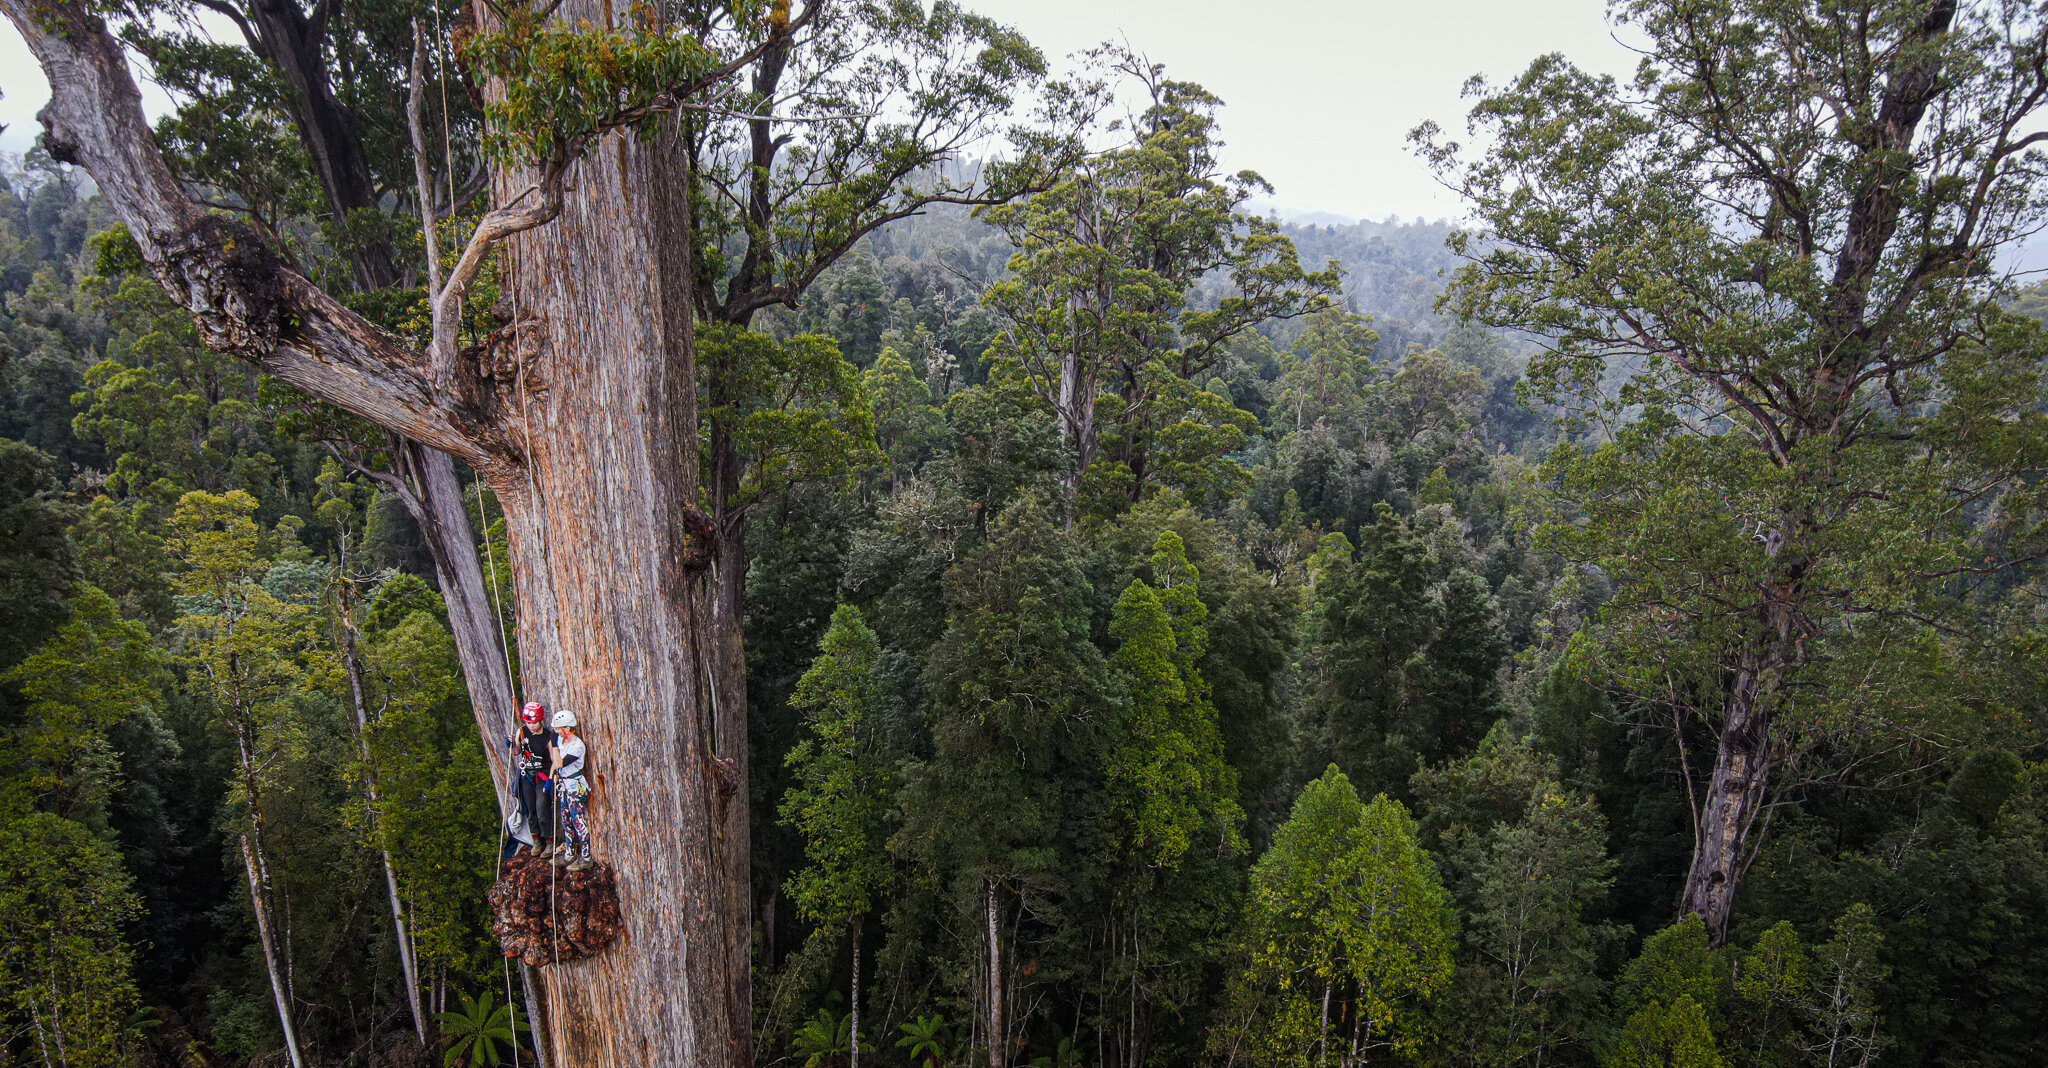  Two tree-sitters take a break on their way to a tent situated 50 metres this giant tree in Pieman, Tasmania. 